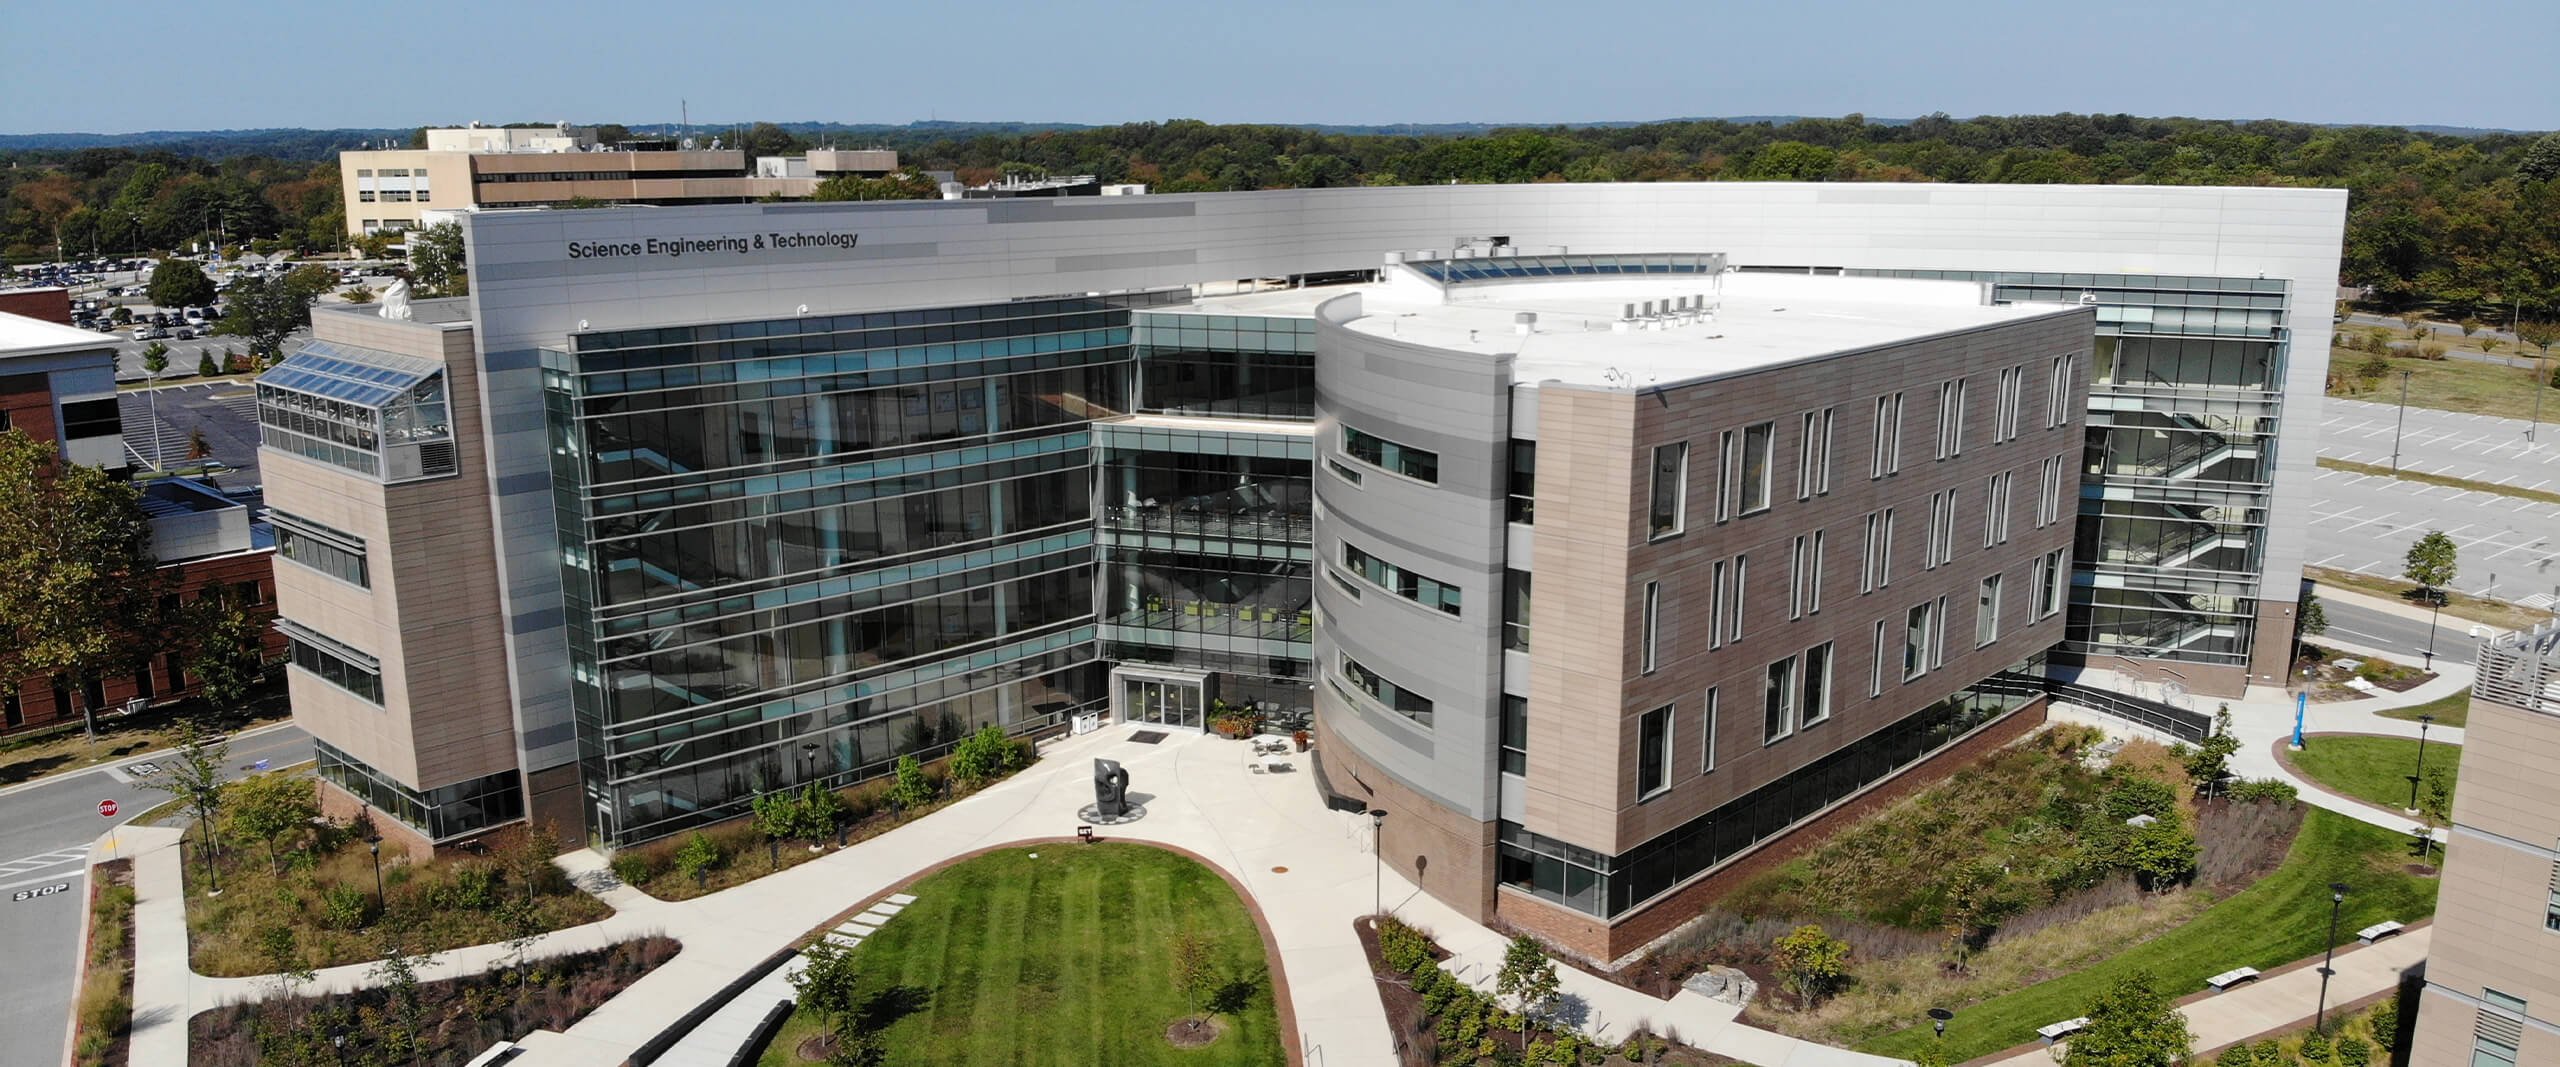 The Howard Community College Science Engineering & Technology building